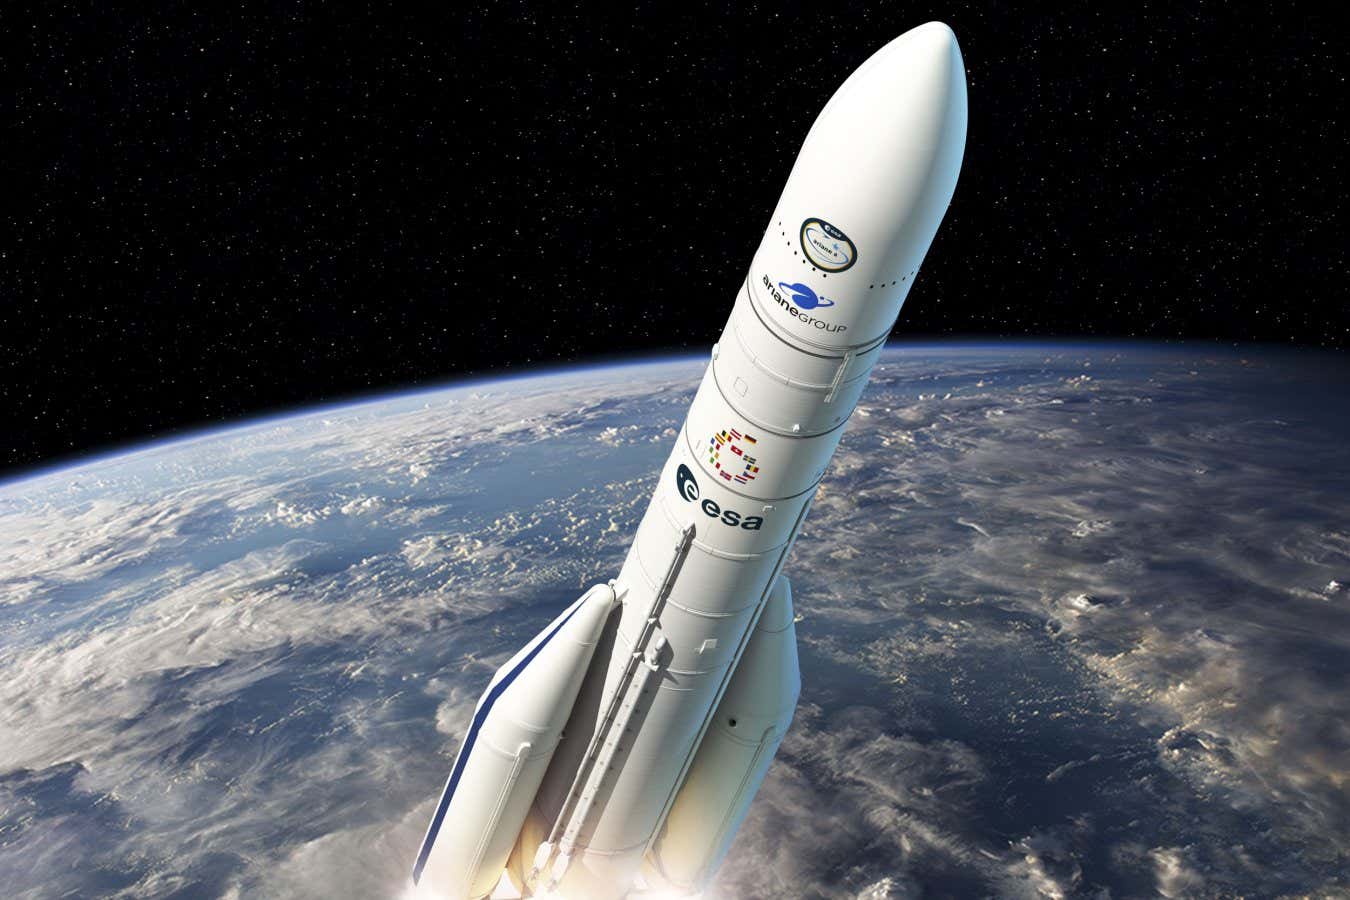 Ariane 6 rocket launch: What is it and when is it happening?